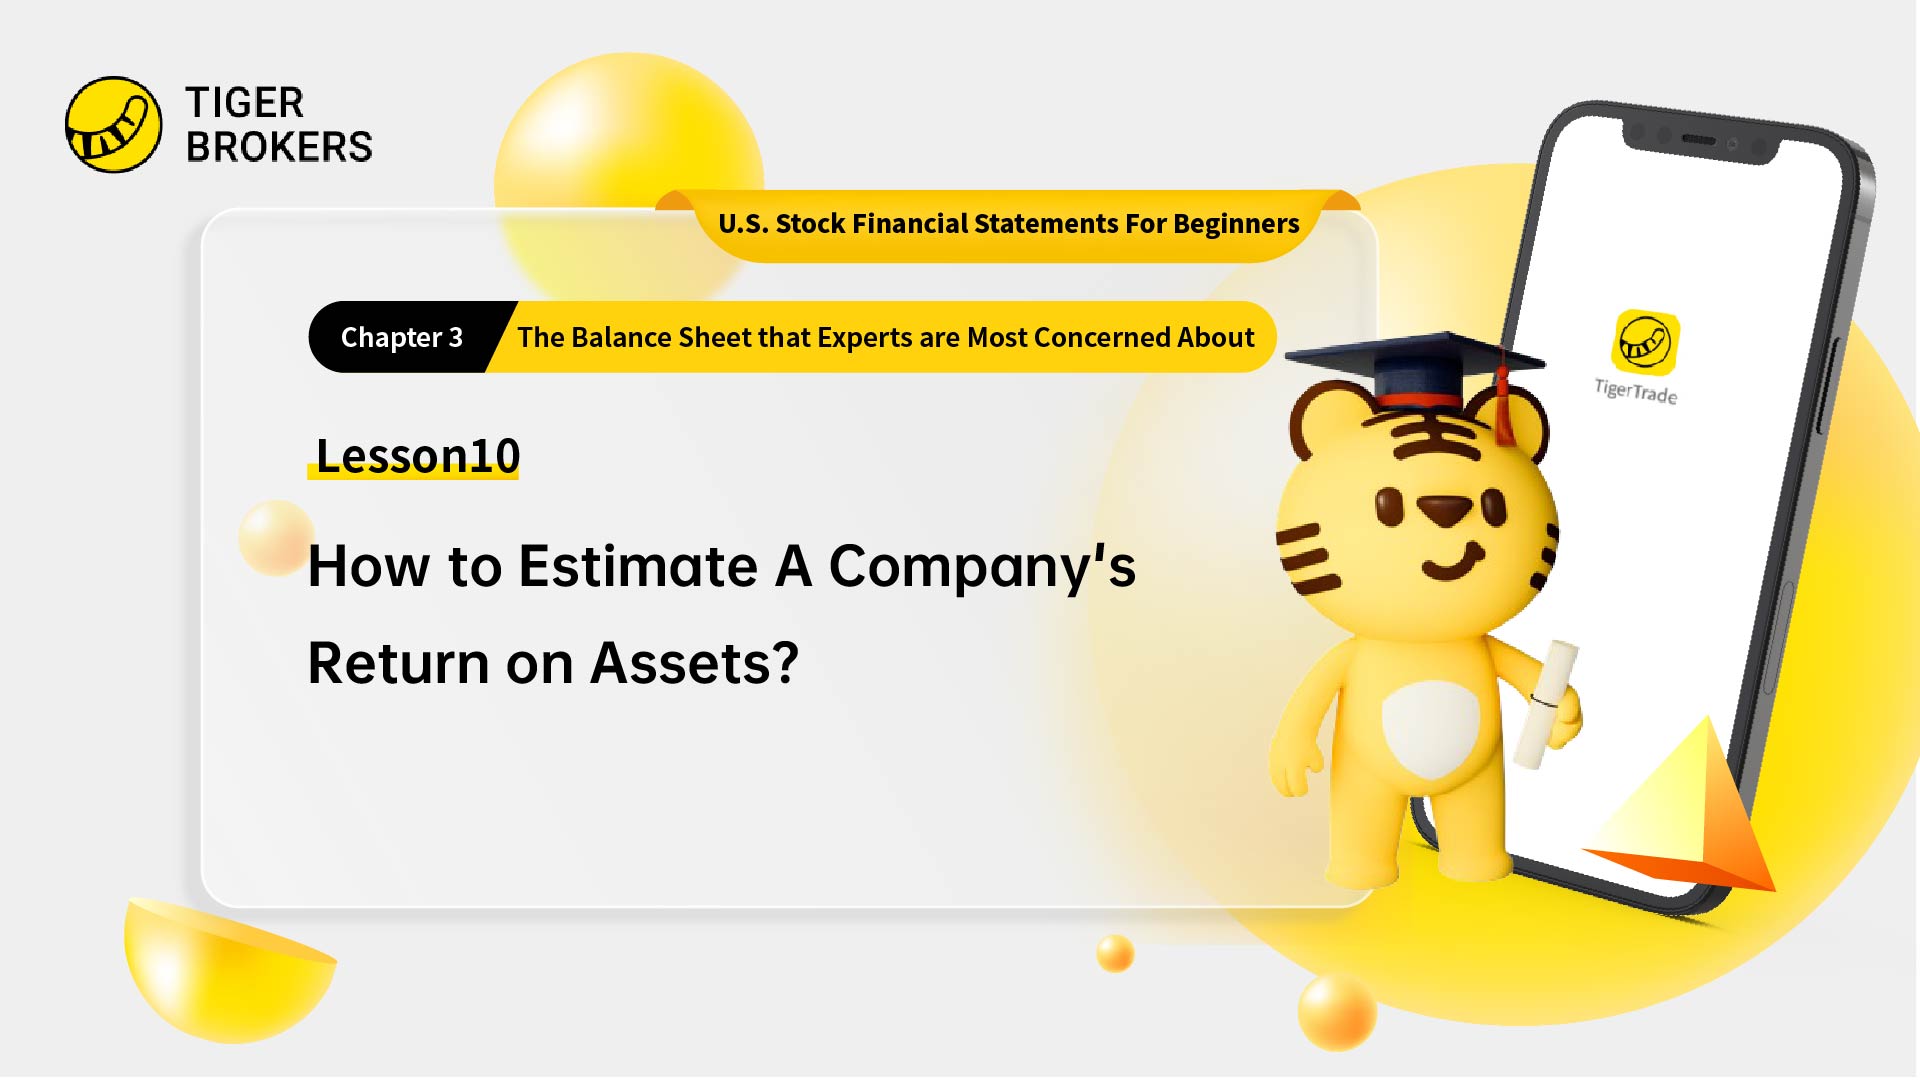 Lesson 10: How to estimate a company's return on assets?